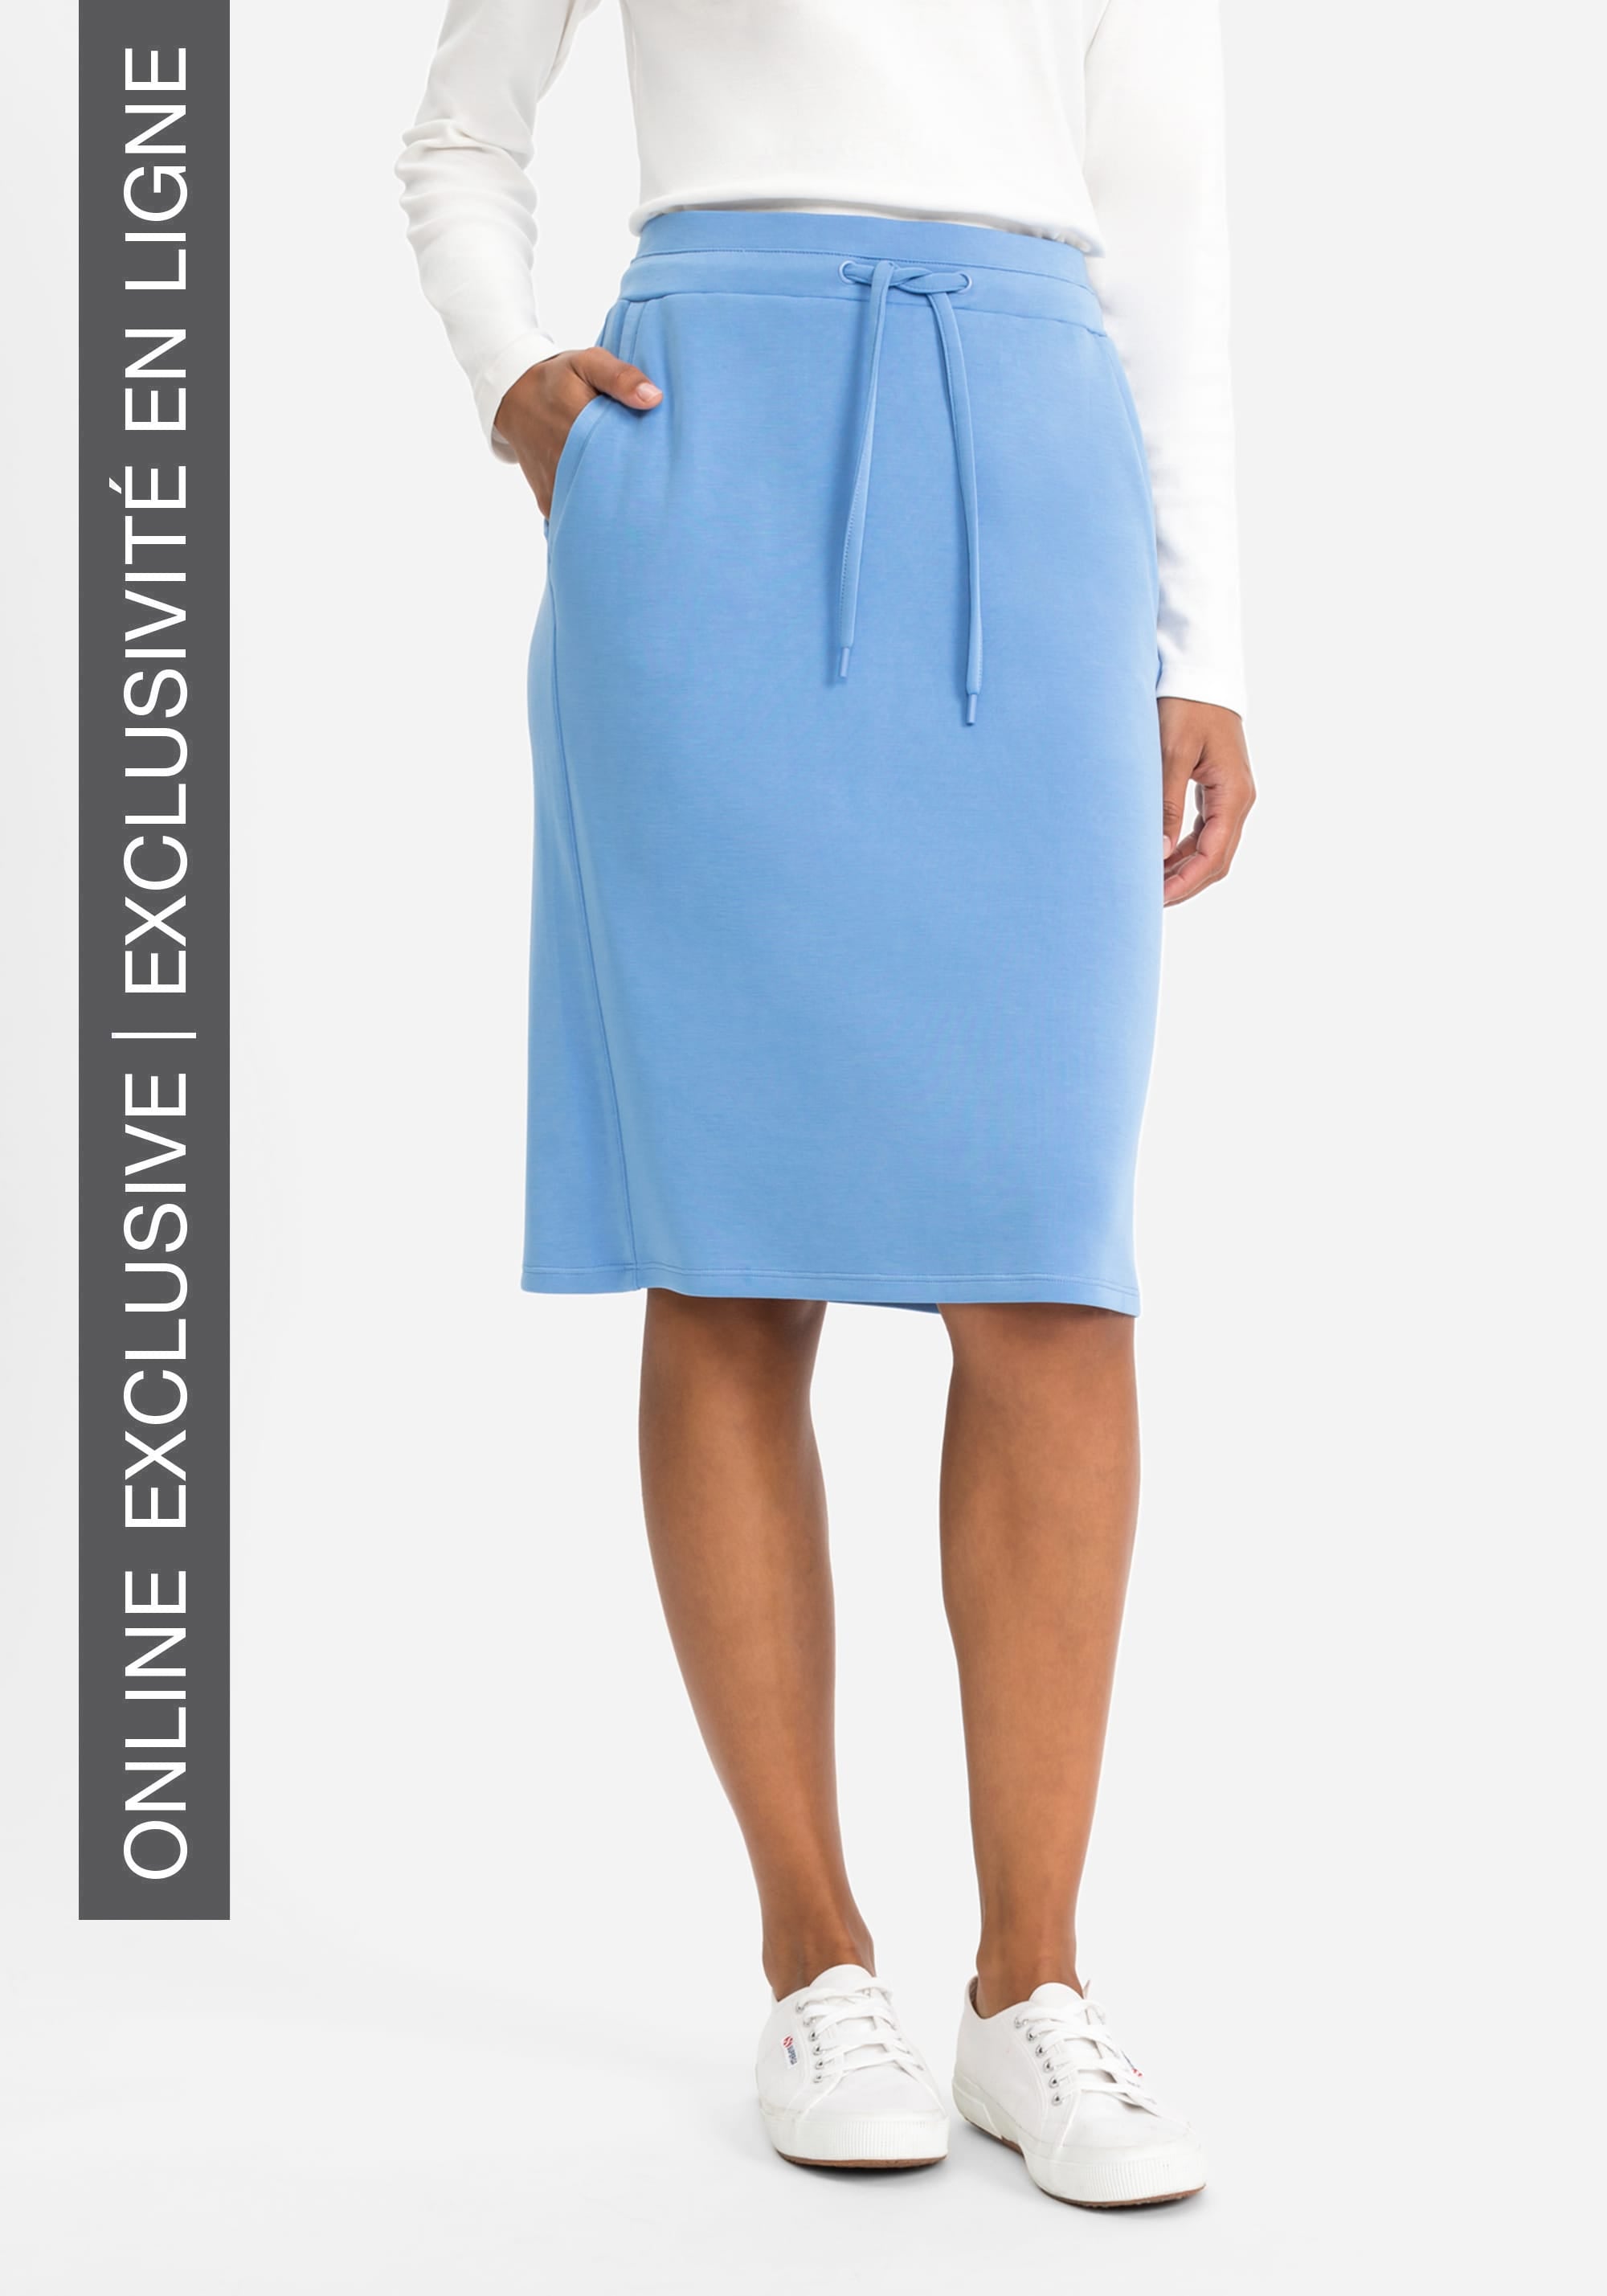 Marciano scuba skirt Women | Marciano by GUESS® Official Website